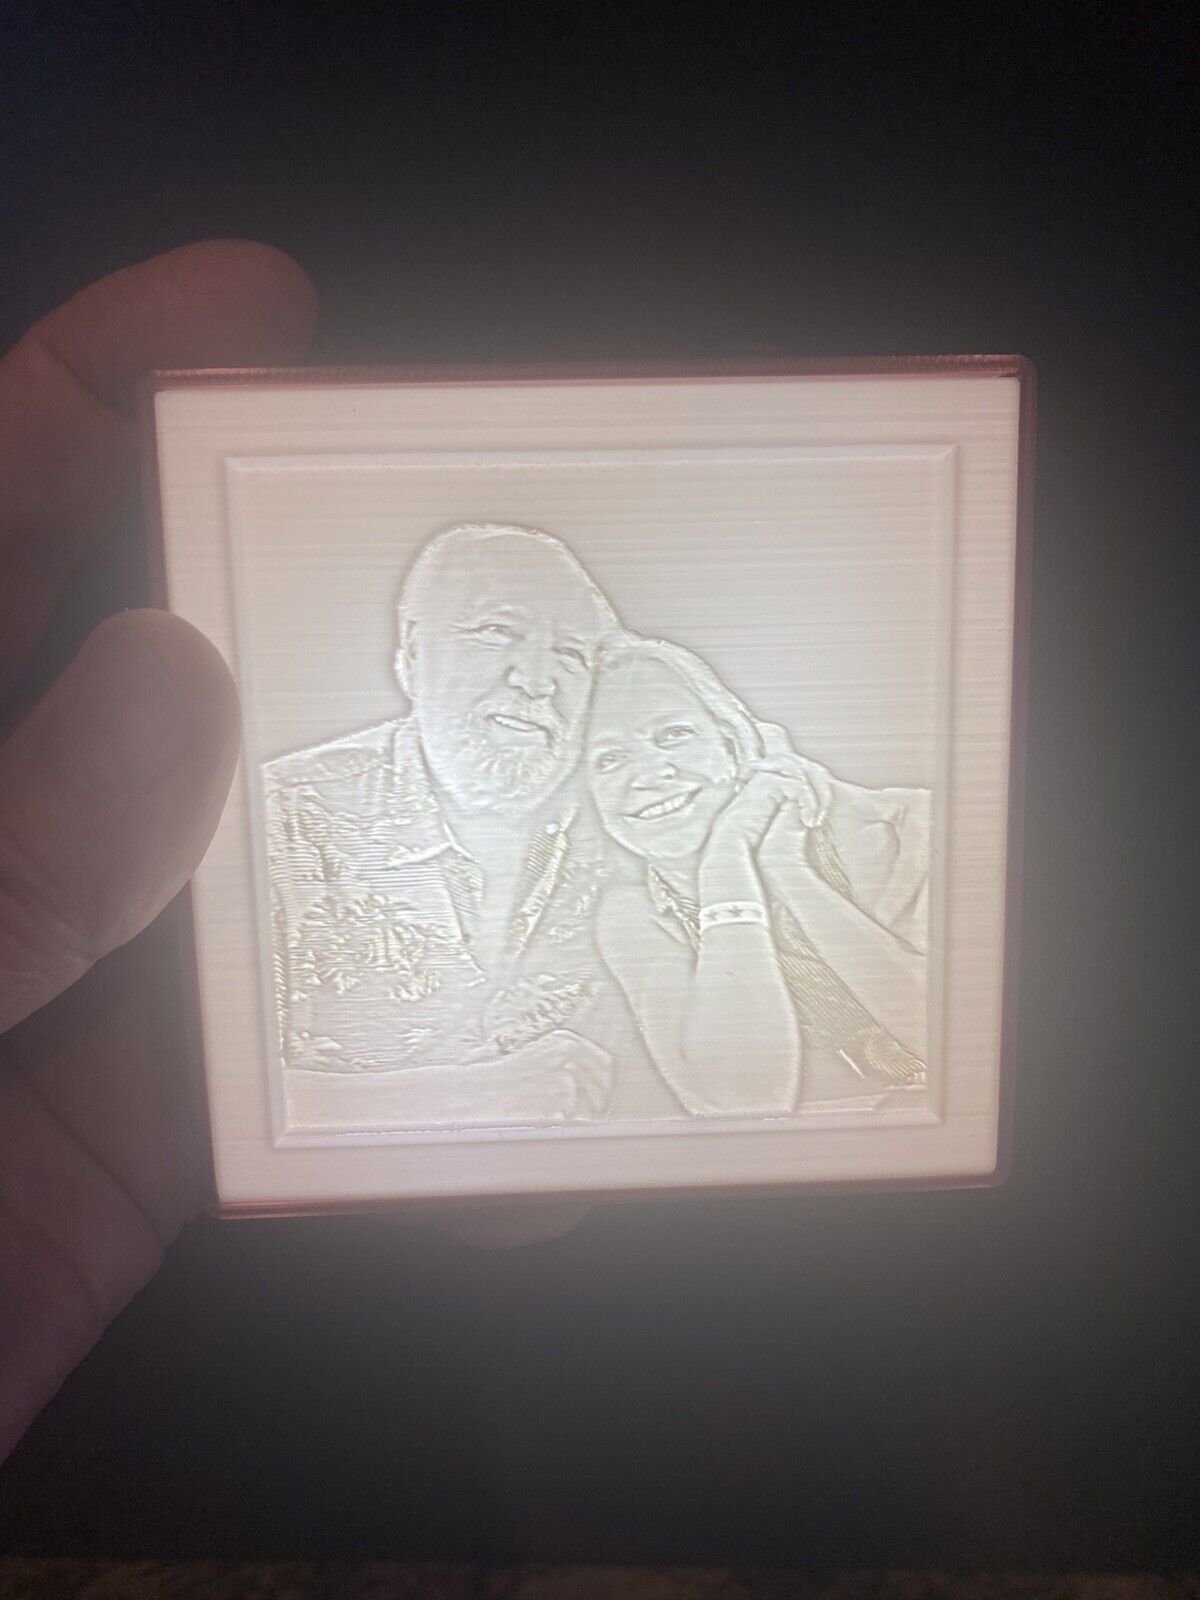 Customized 3D Printed illuminated pictures. Your images imortalized in 3D